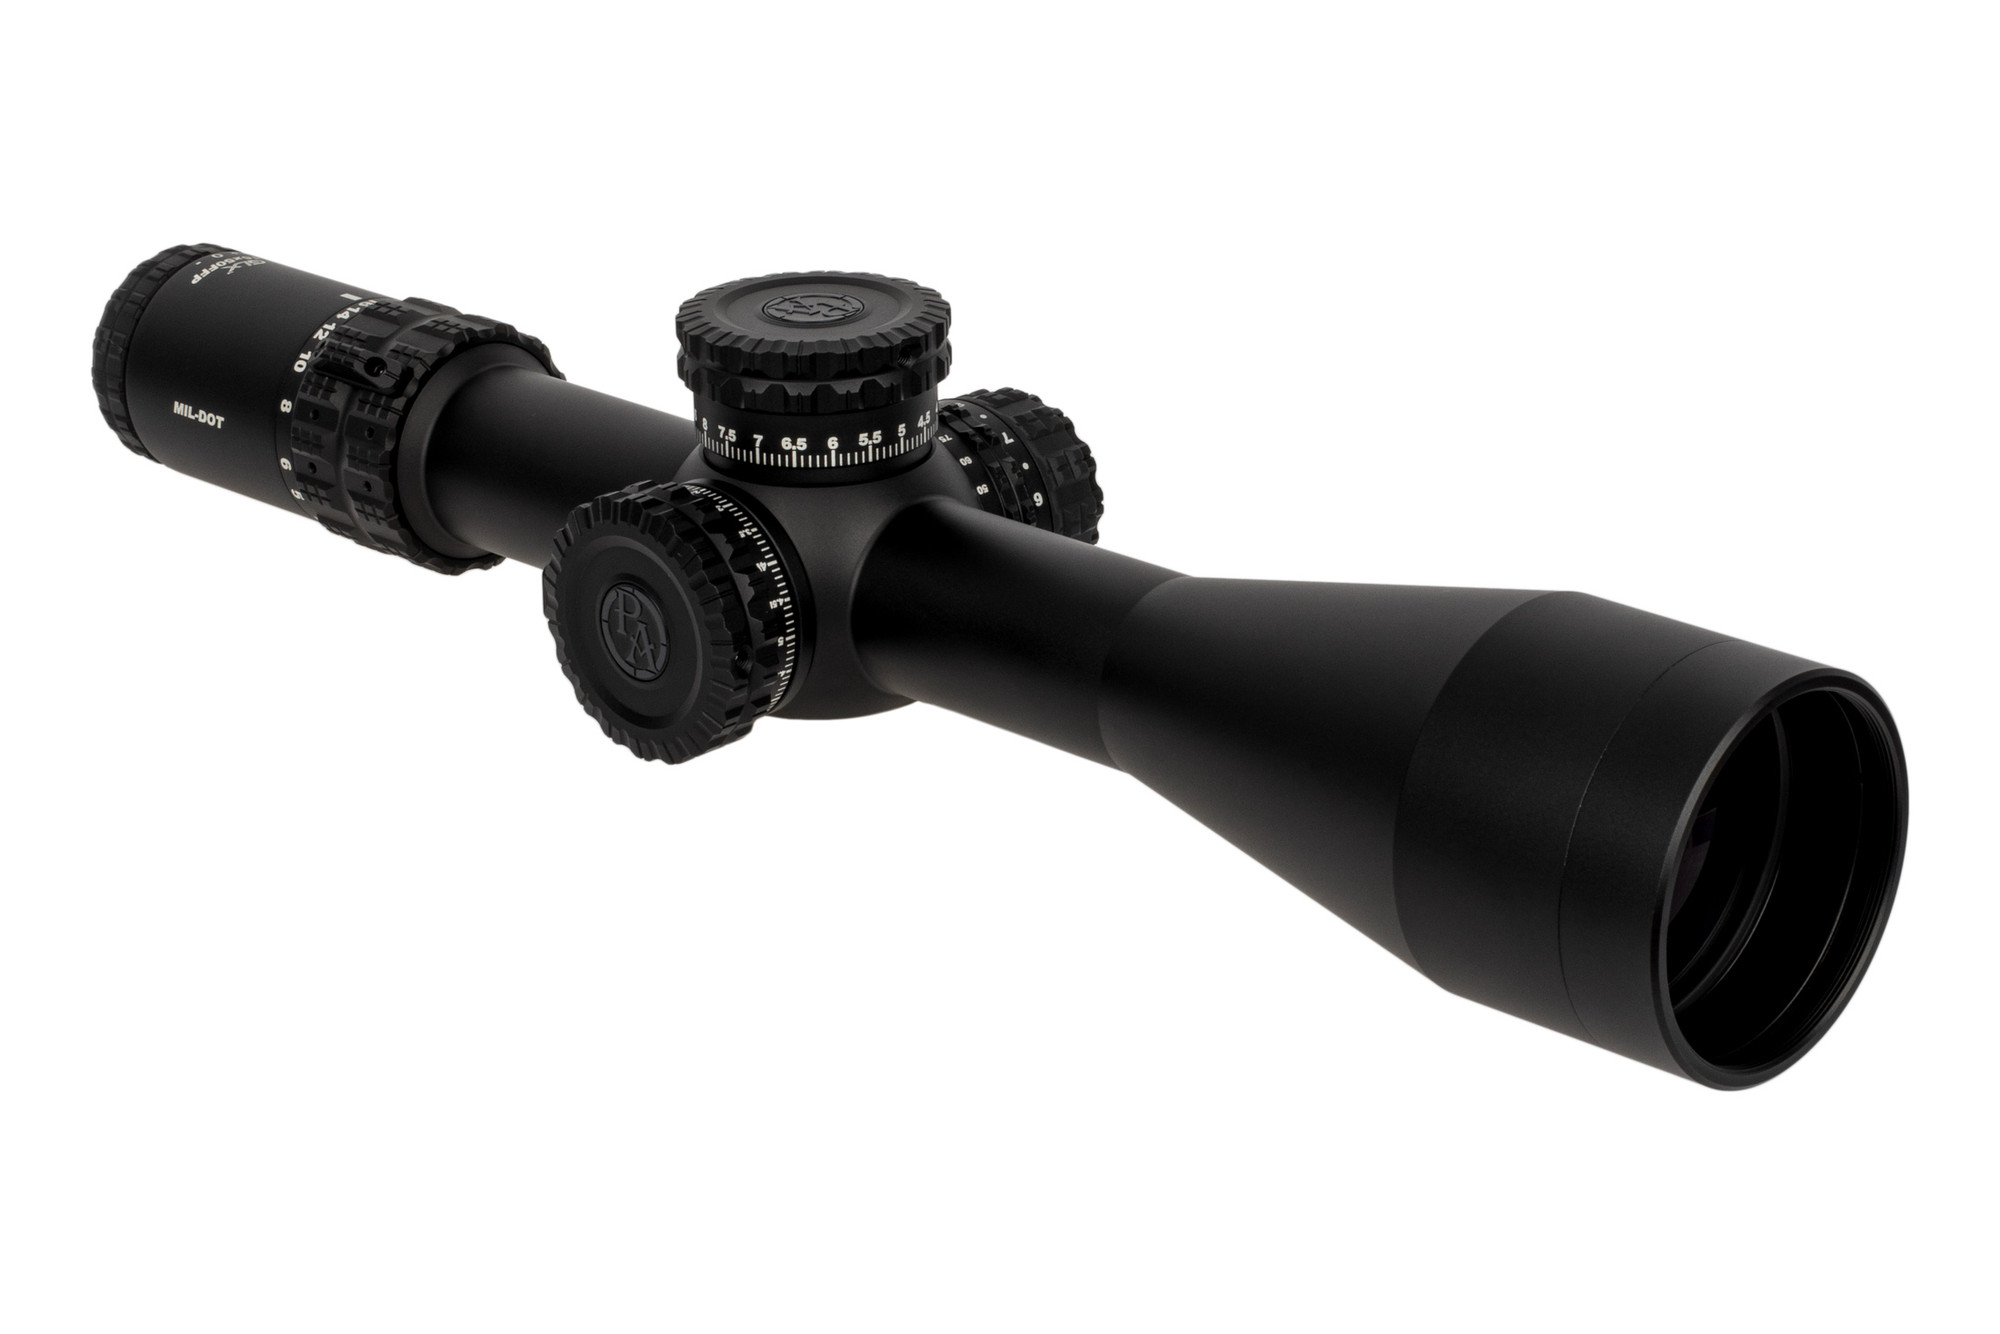 Primary Arms Now Shipping New GLX Rifle Scopes